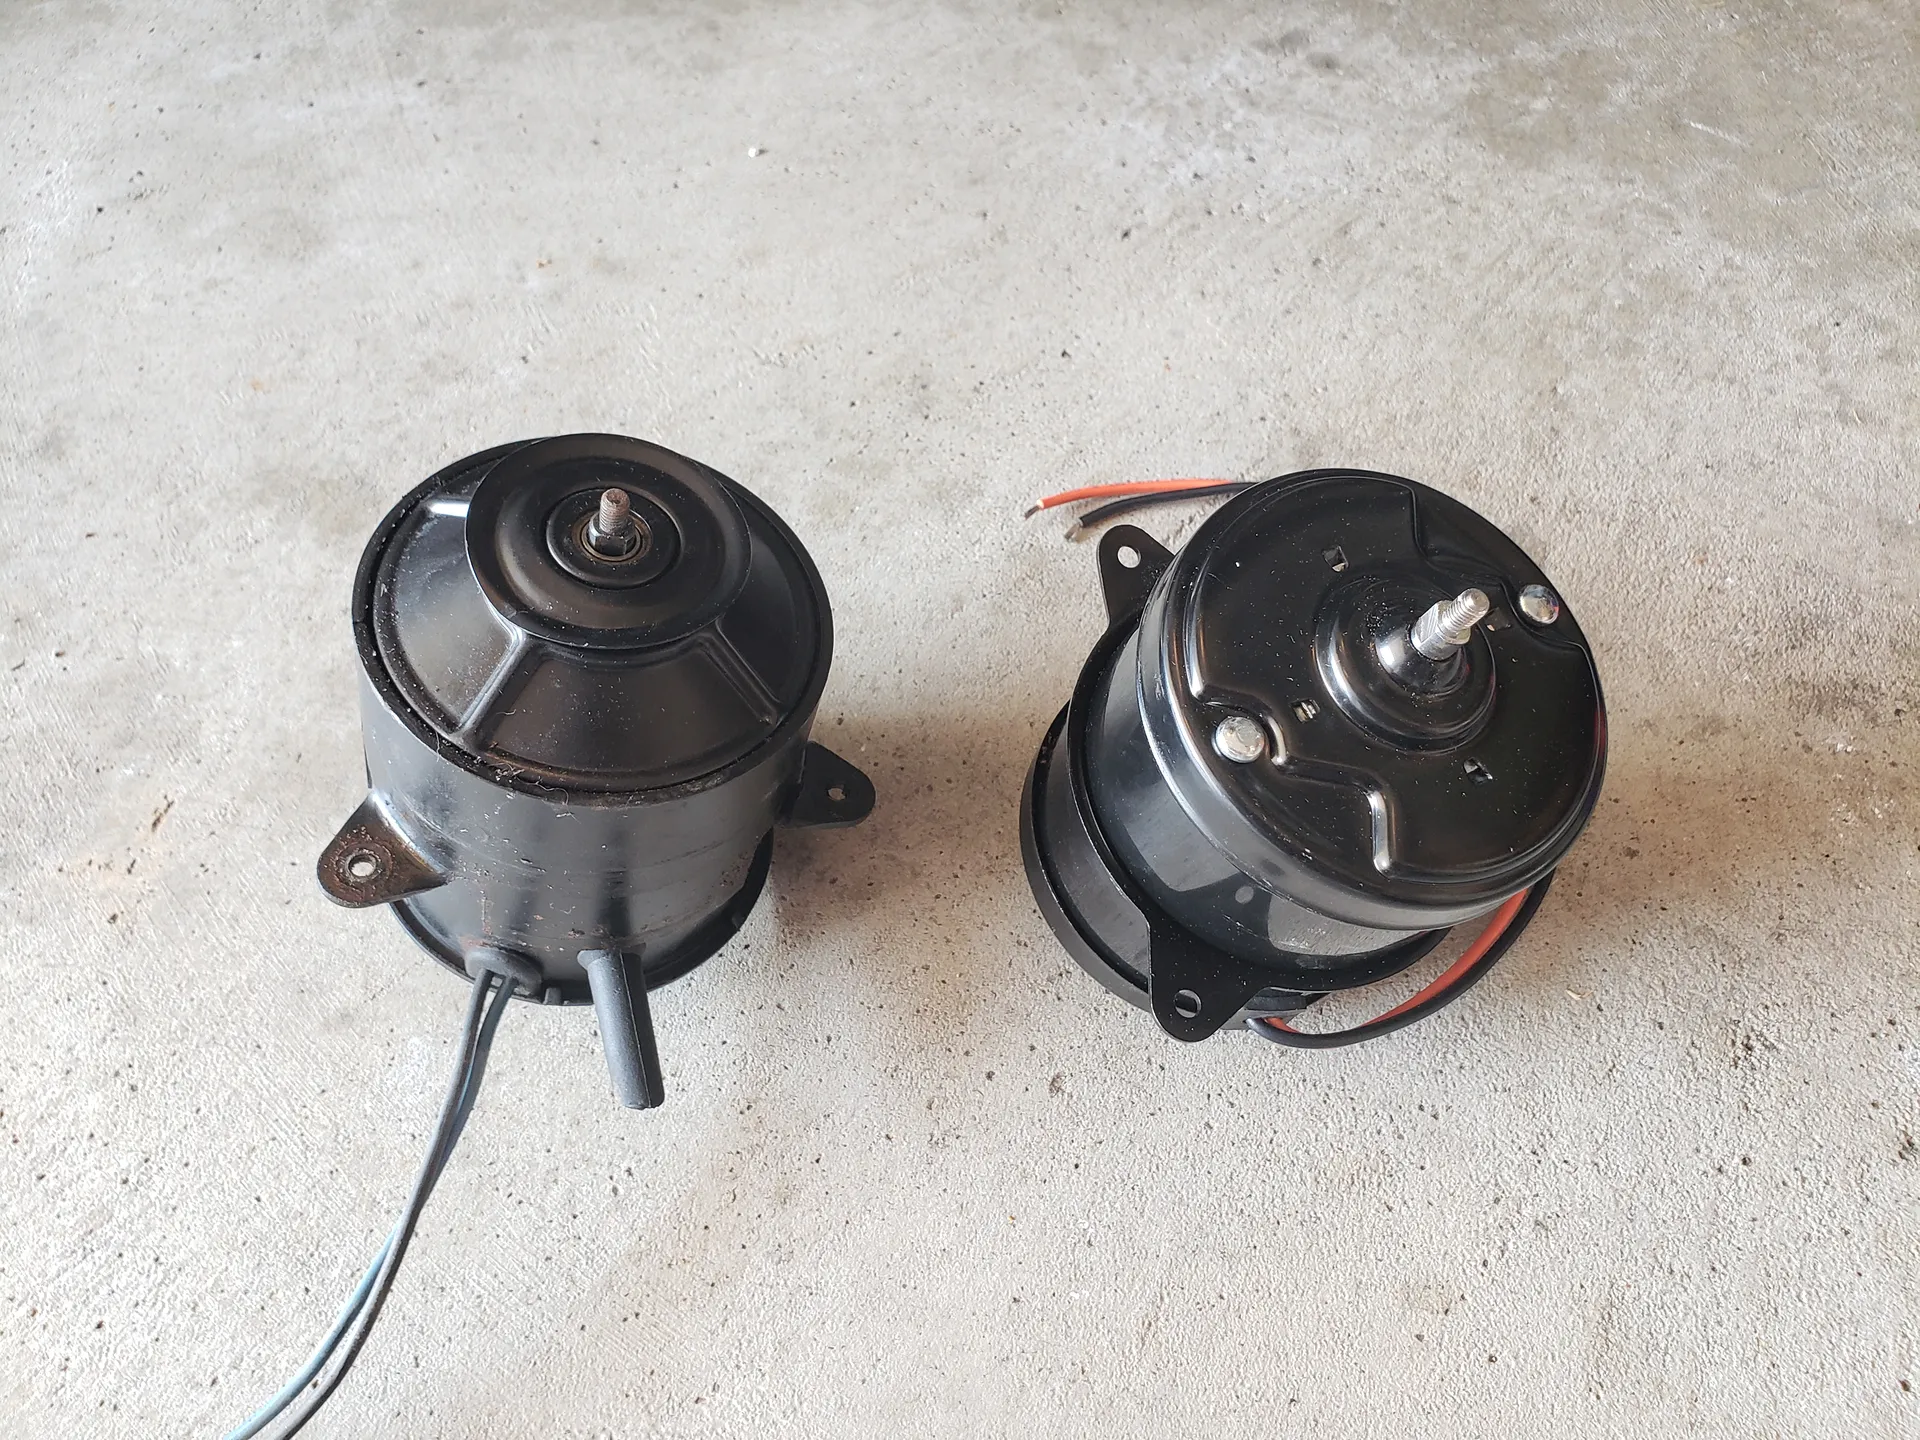 Old (left) and new (right) fan motors